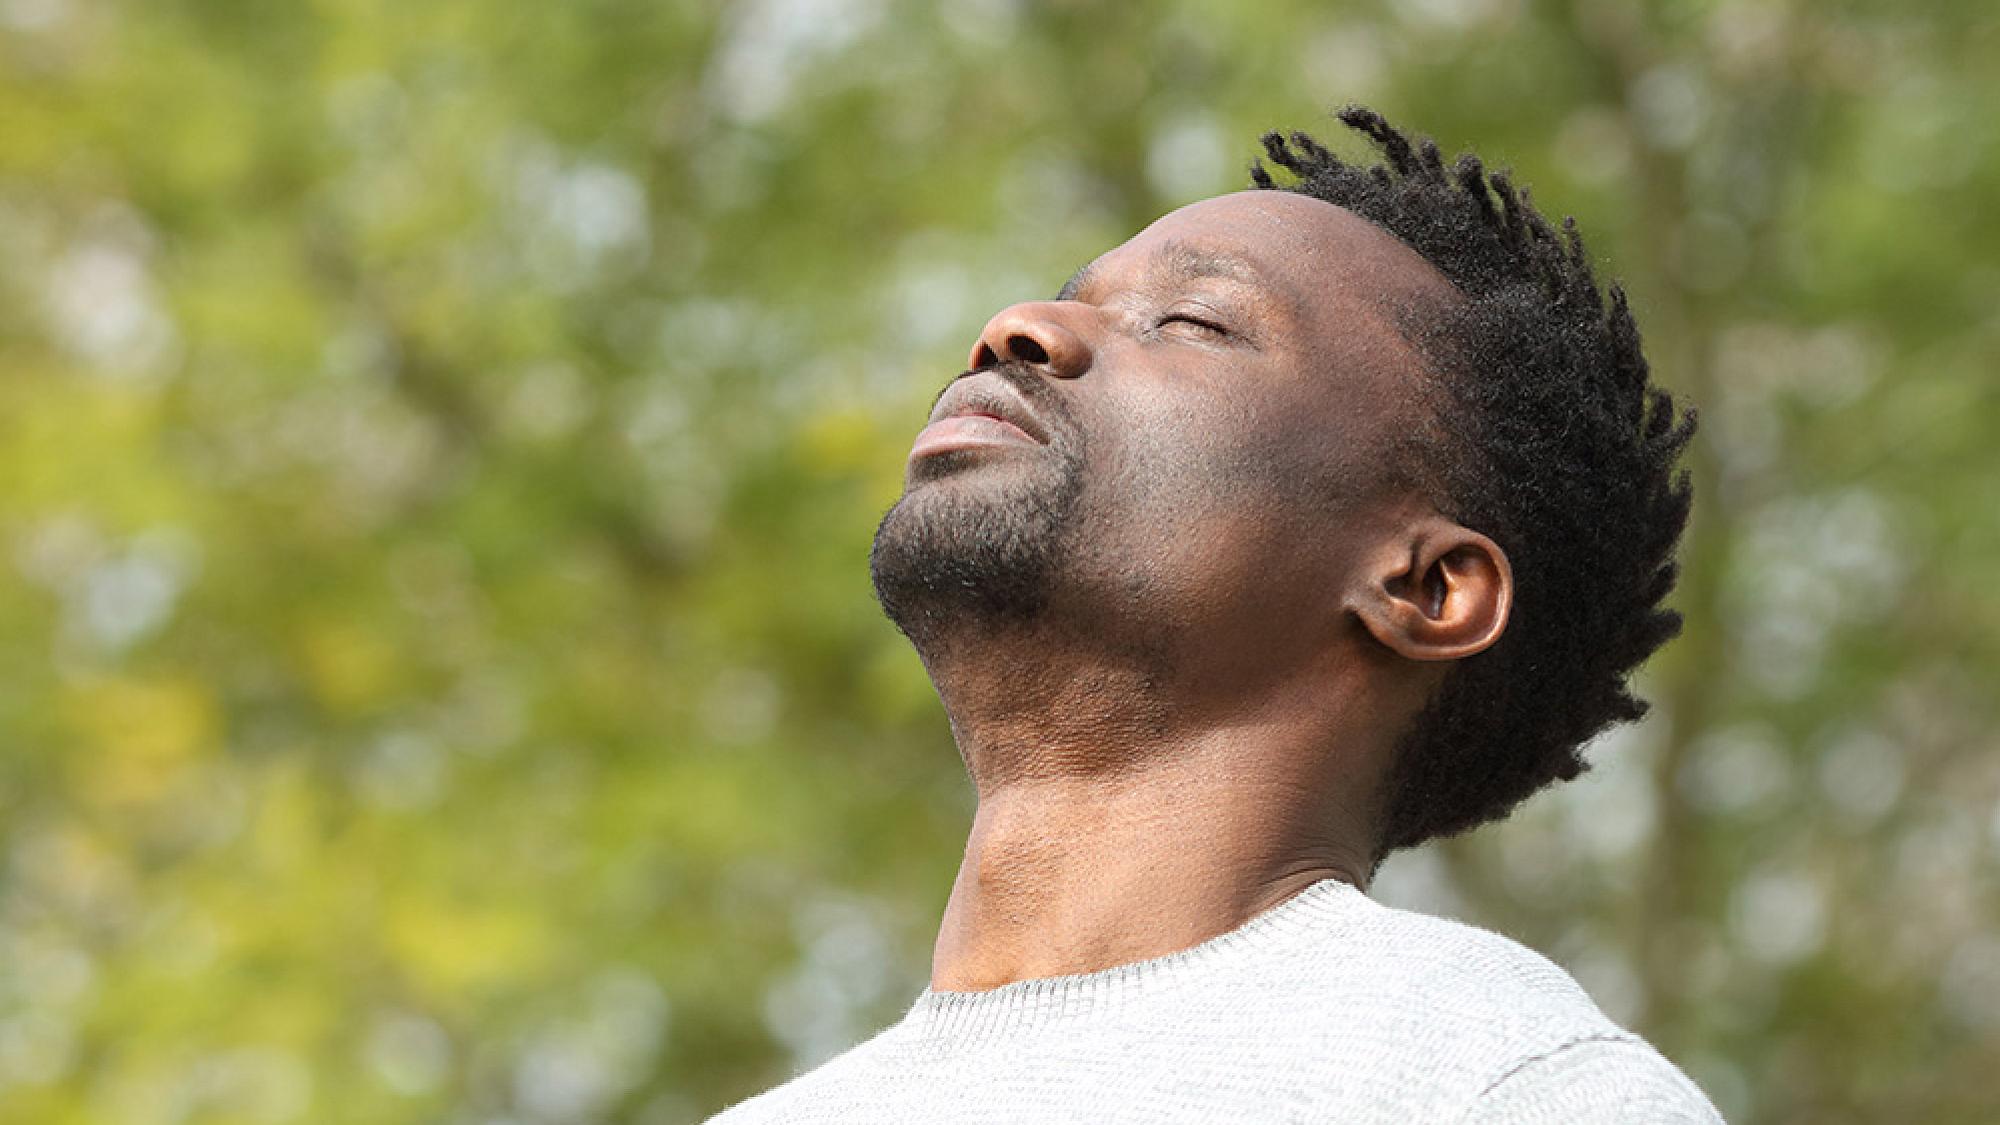 Man standing outdoors and breathing in deeply with his eyes closed